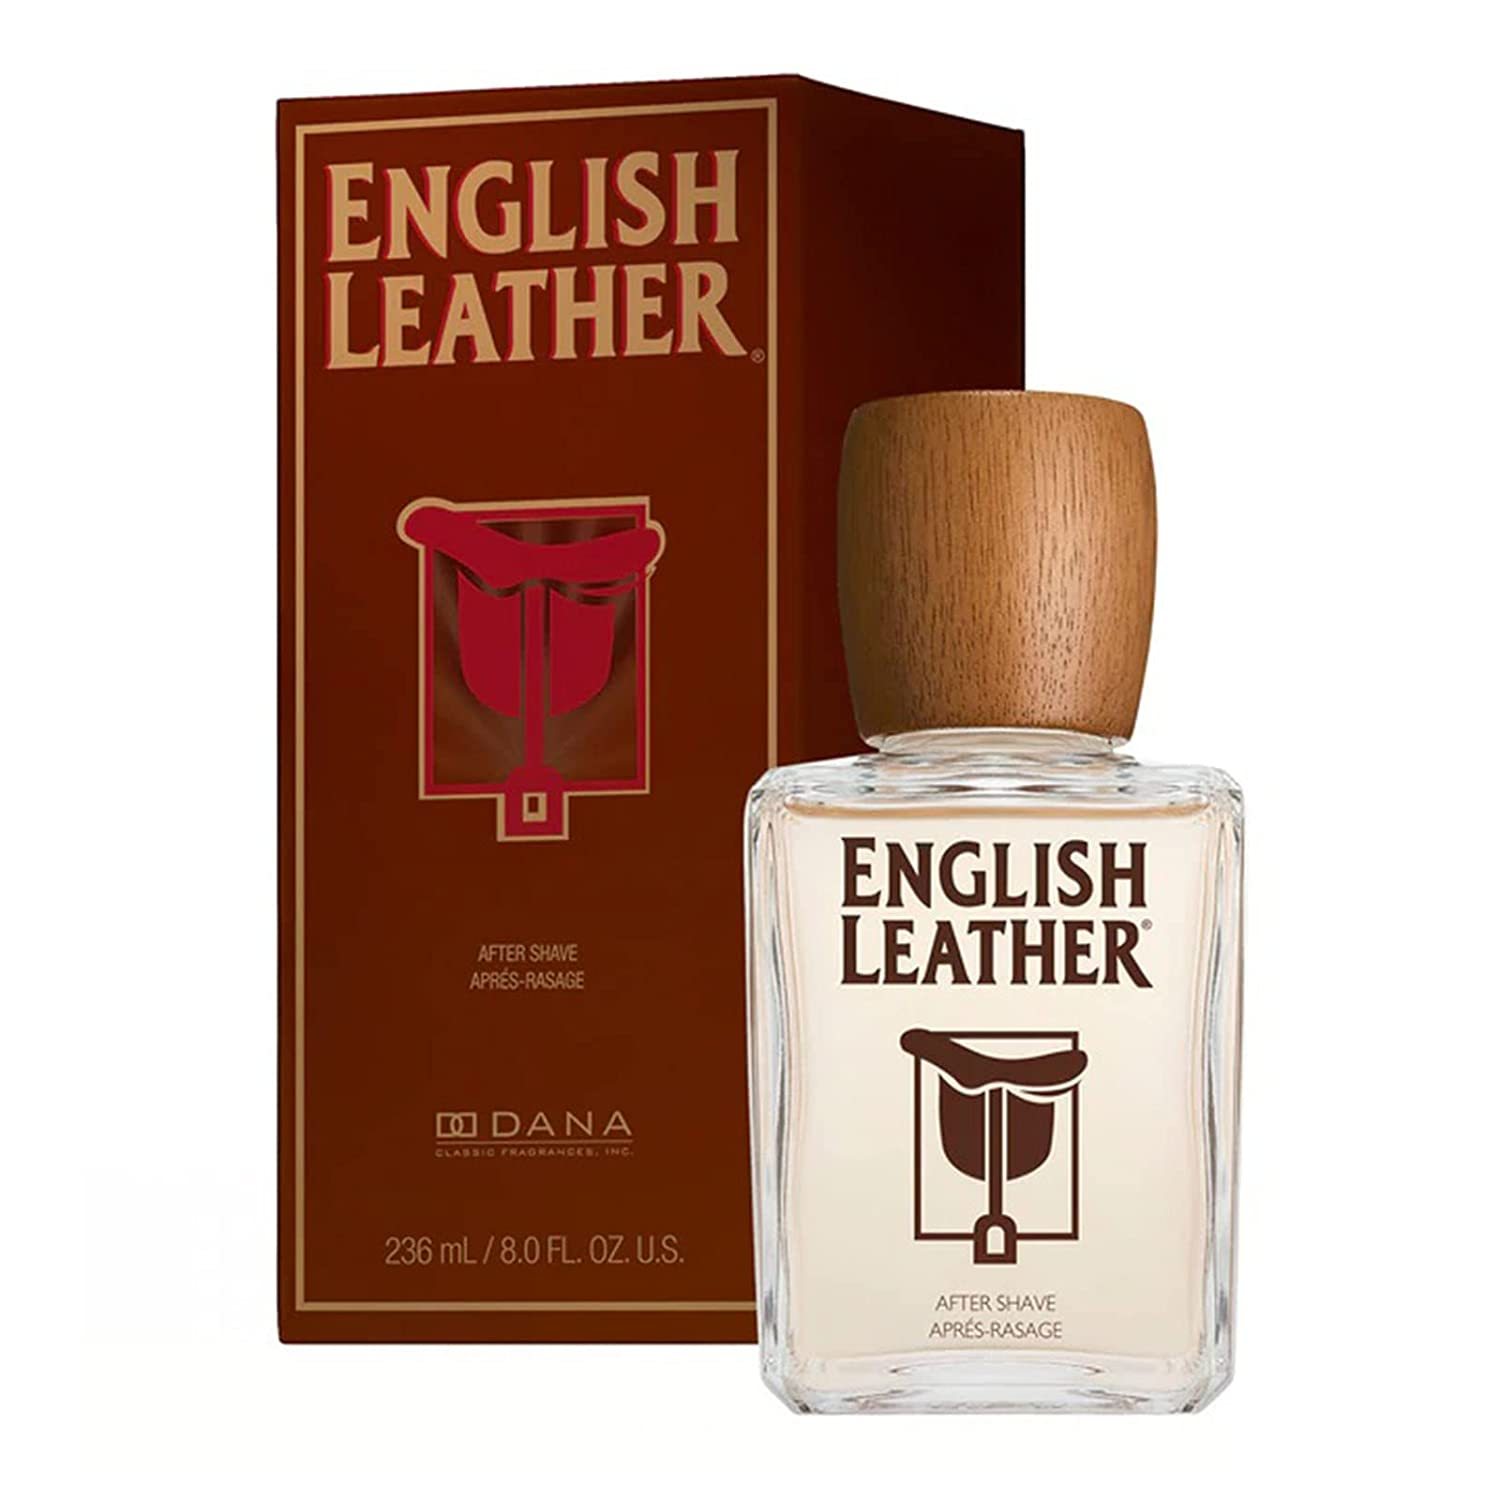 New ENGLISH LEATHER by Dana for Men After Shave Splash, 8 Ounce